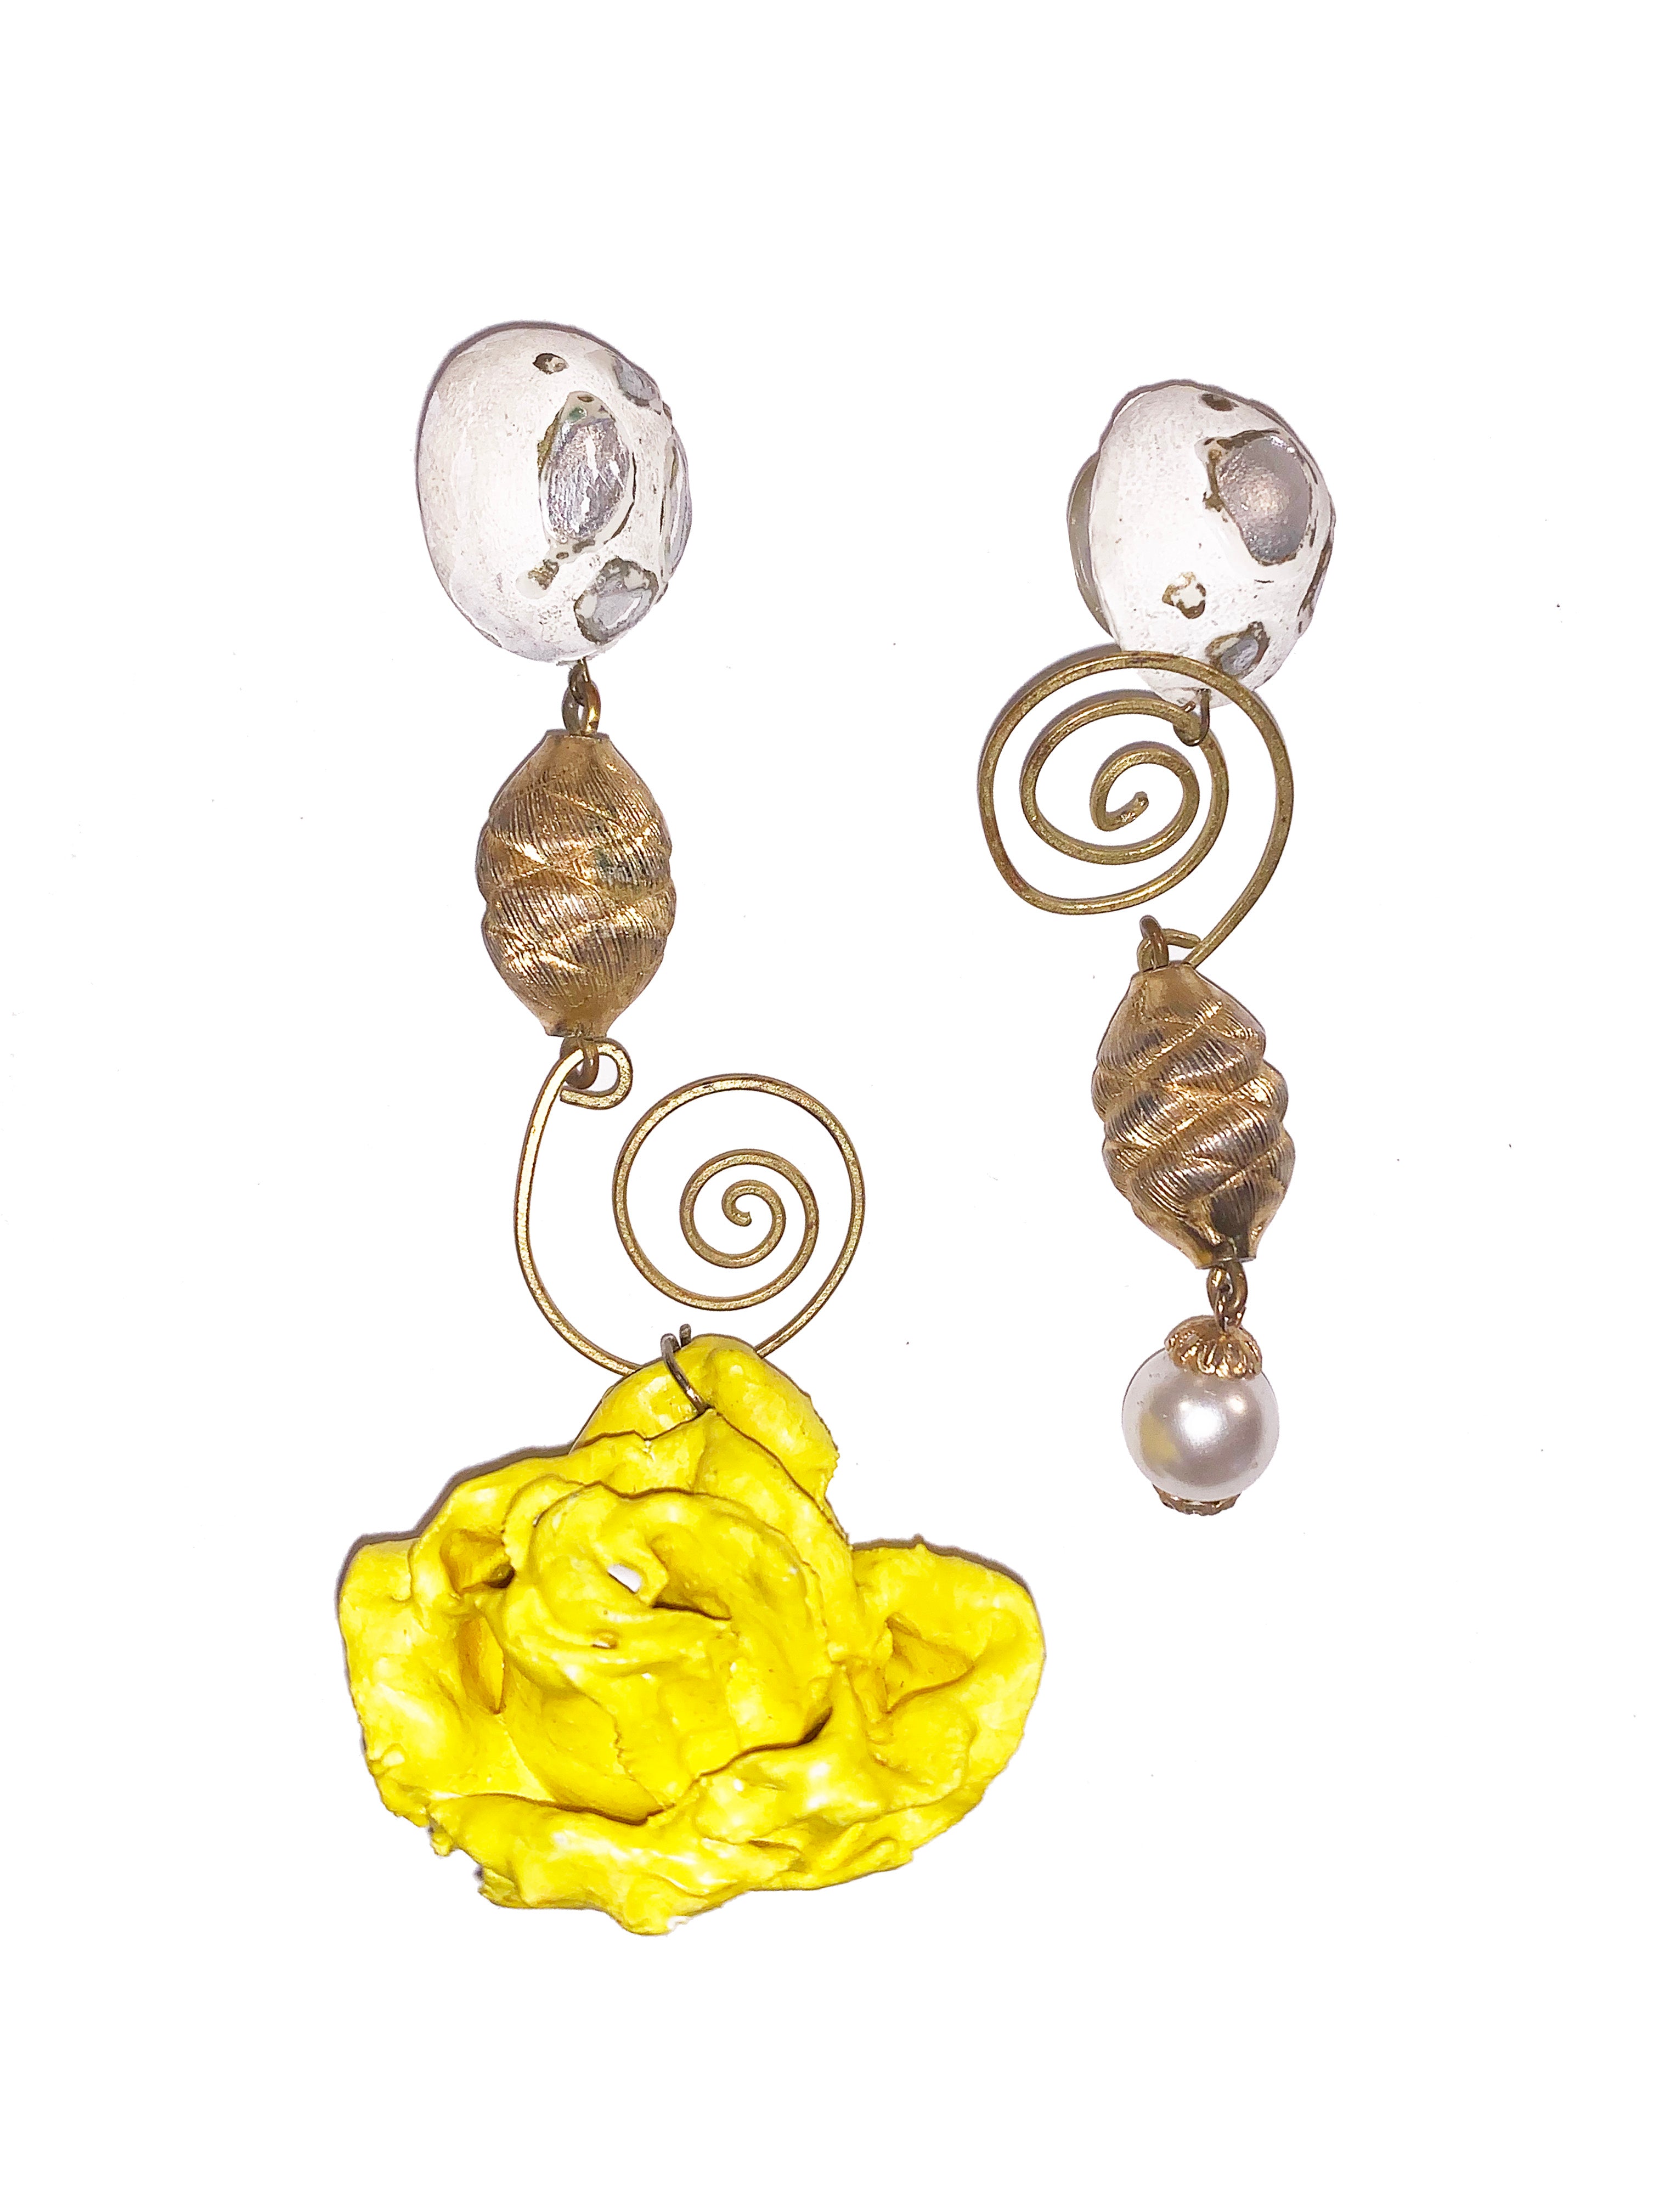 Kathleen, Shop Kathleen, Kathleen Los angeles, independent boutique, independent fashion, sustainable fashion, sustainable jewelry, upcycled, montreal designer, 3347, 3_3_4_7, found object earring, yellow earrings, punk earrings